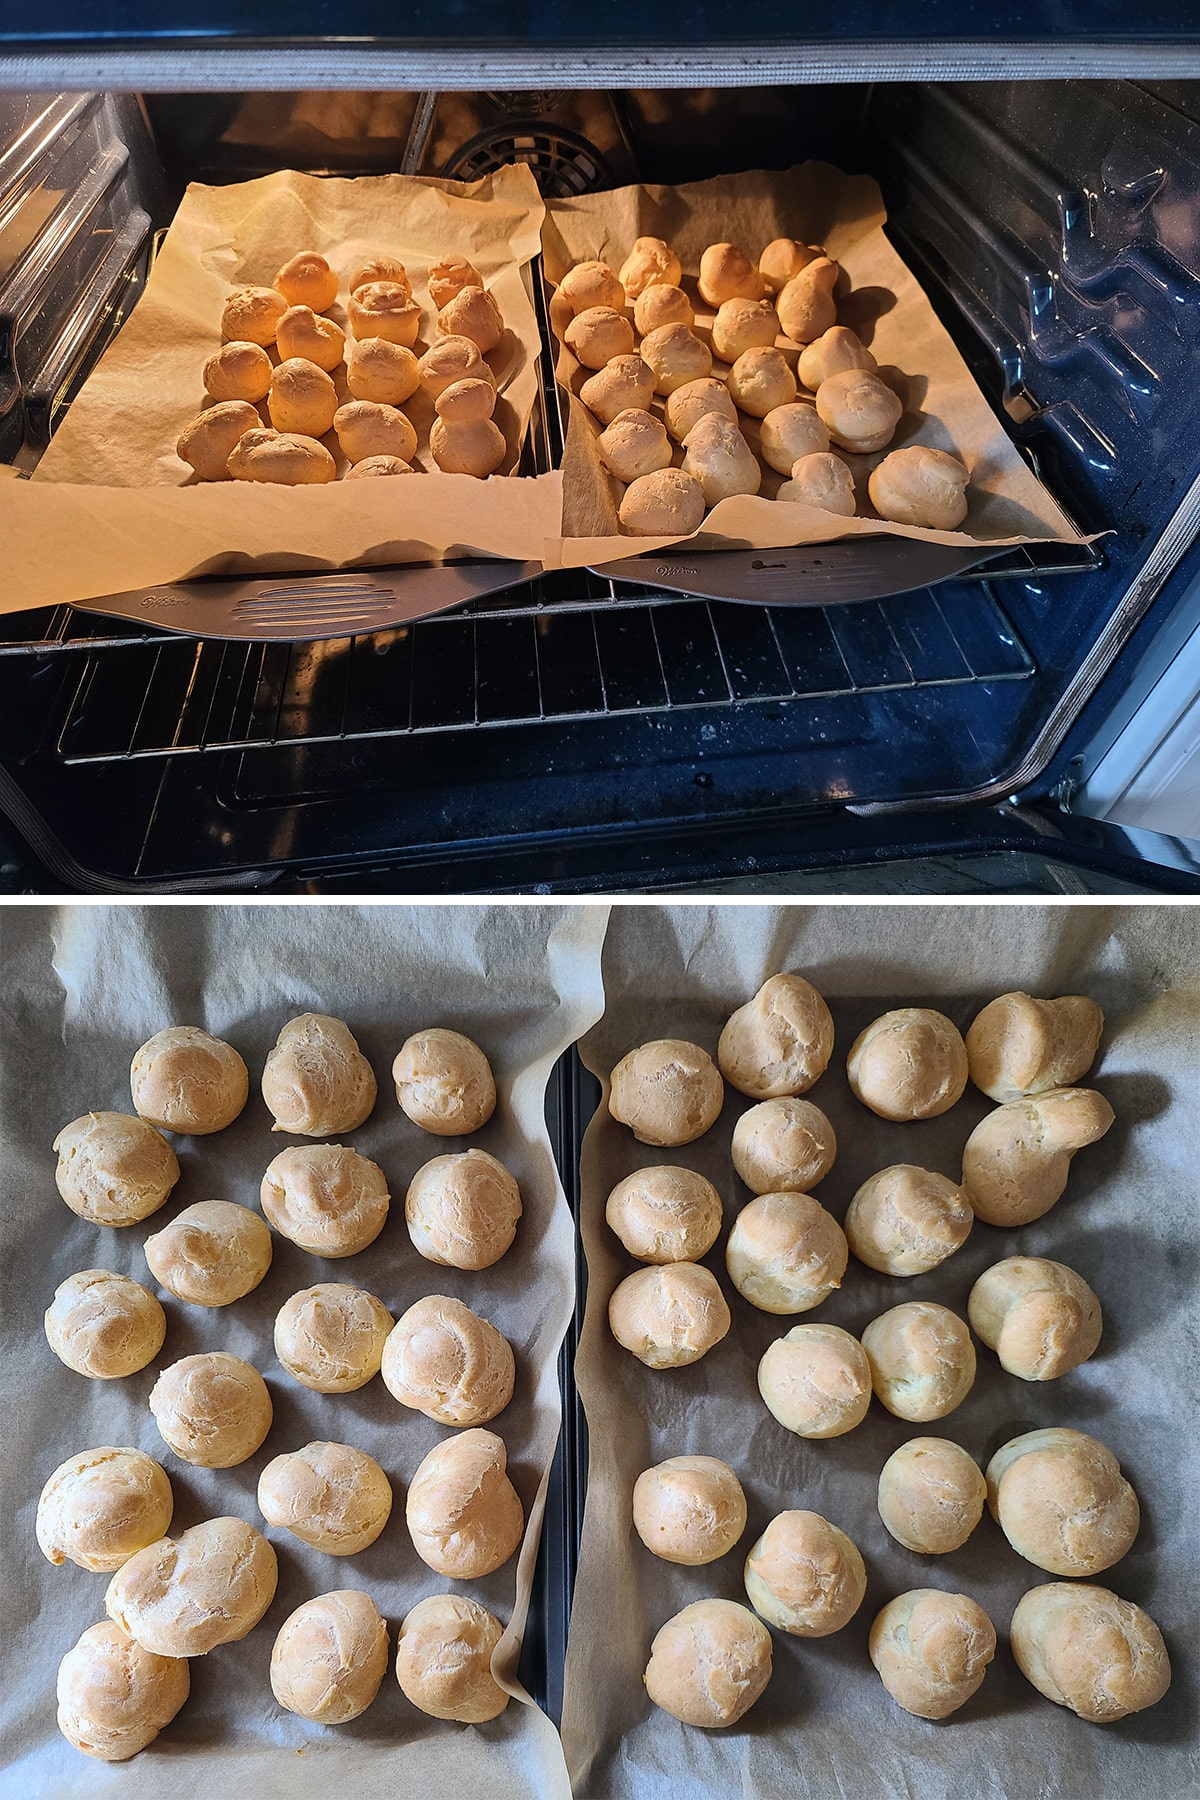 A 2 part image showing the profiterole shells during and after baking.